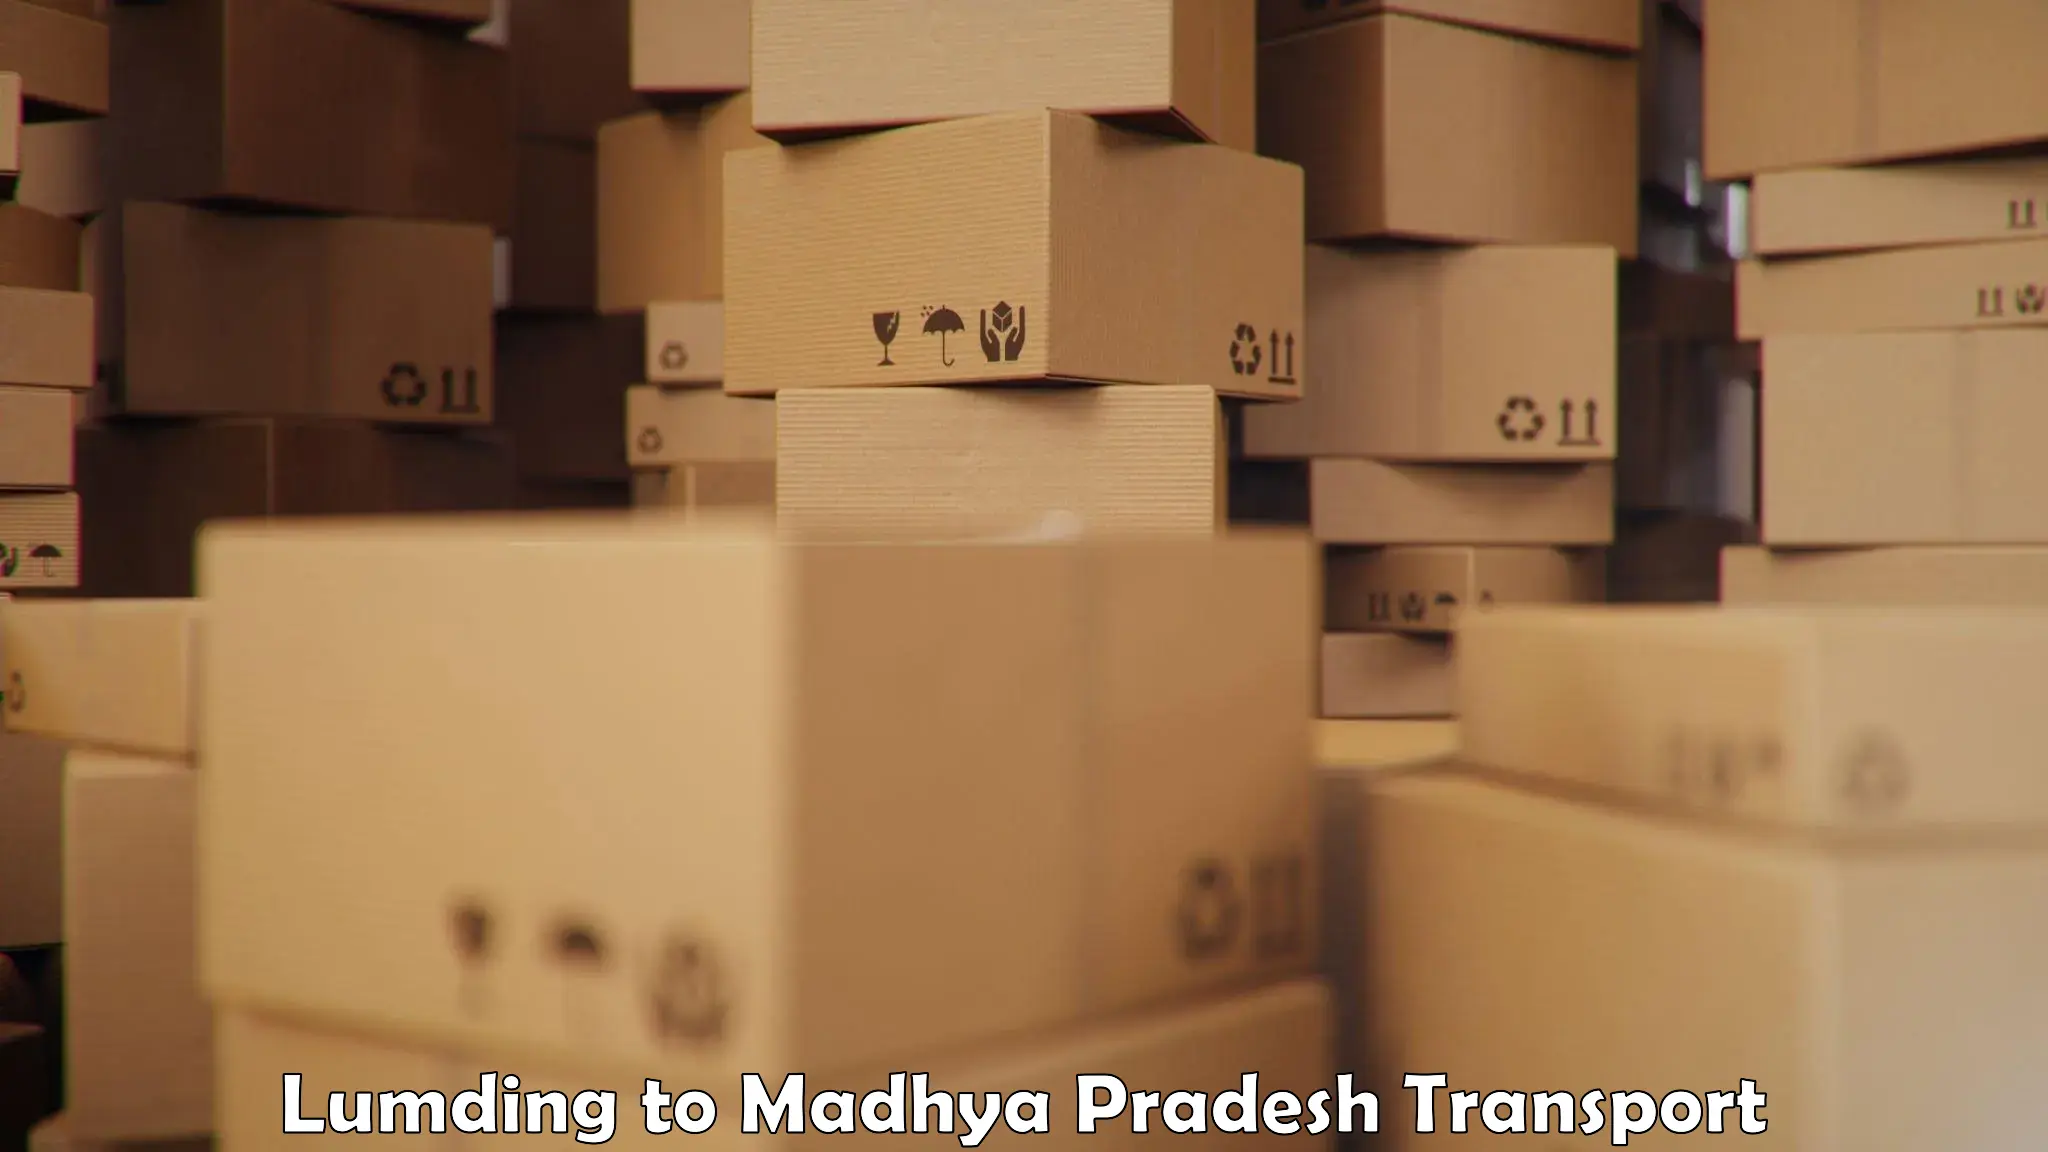 Truck transport companies in India Lumding to Shahdol